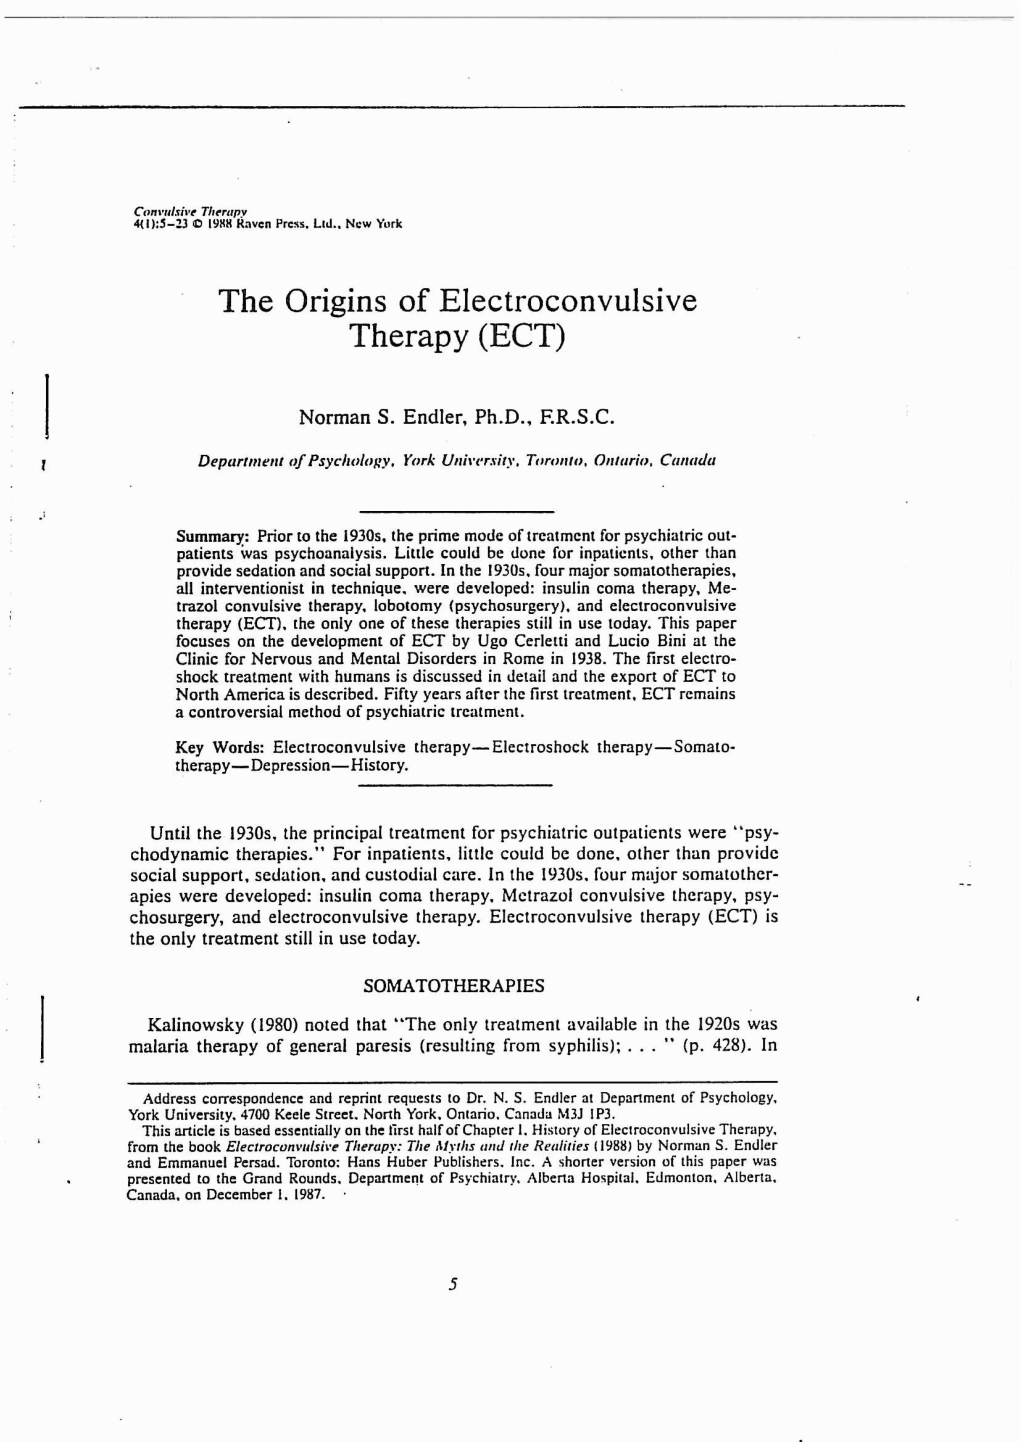 The Origins of Electroconvulsive Therapy ECT